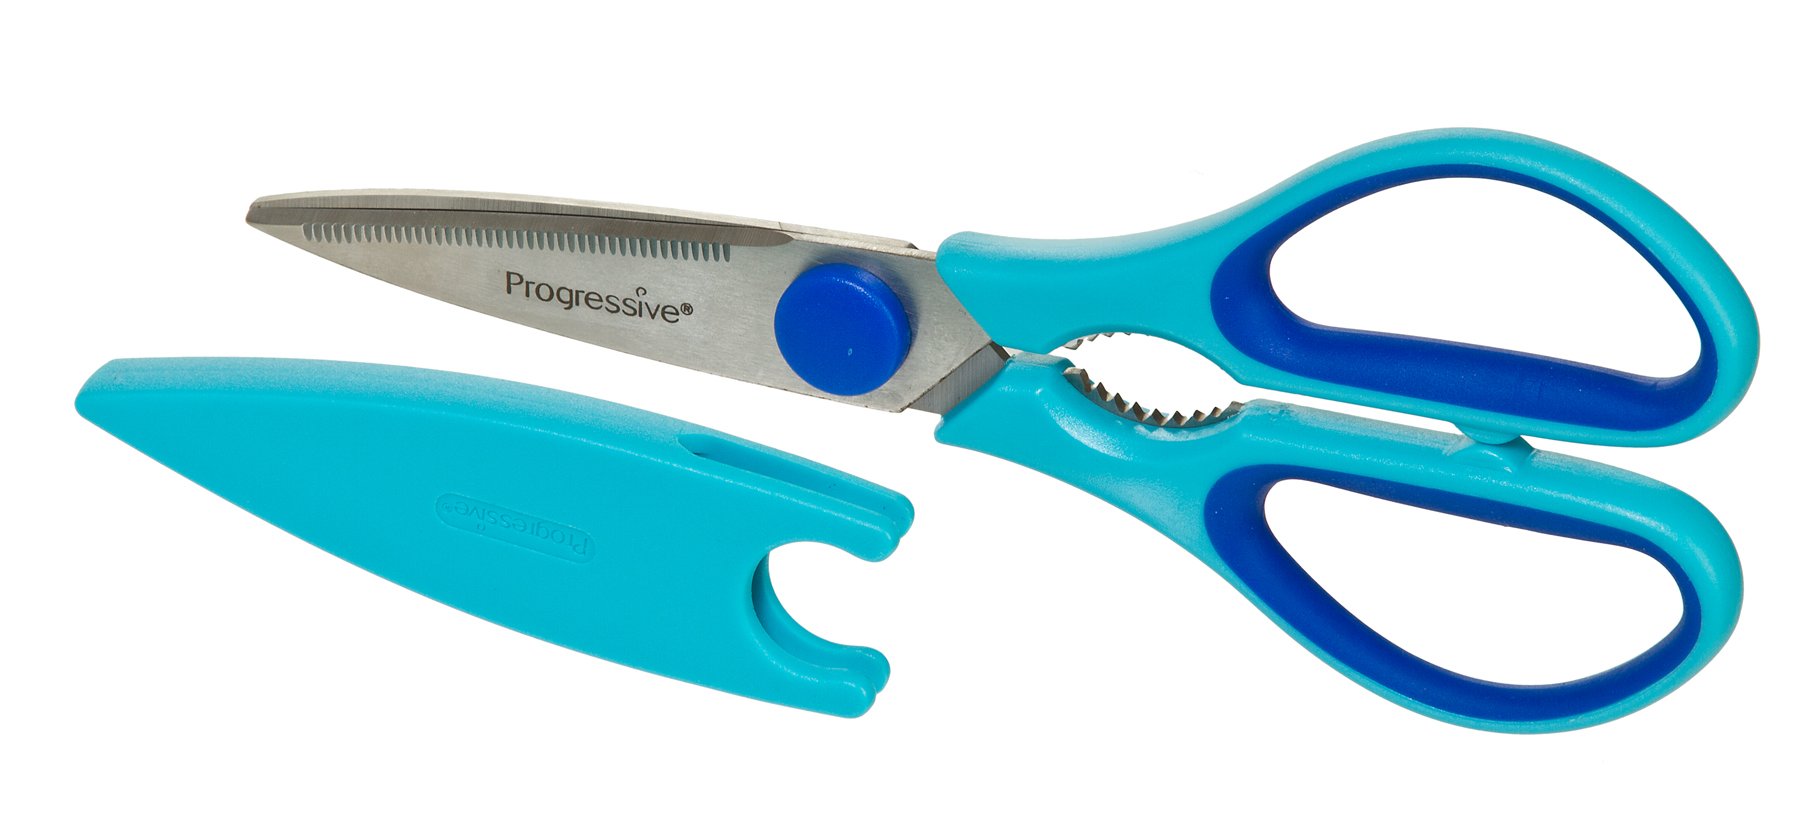 Prepworks by Progressive Kitchen Shears with Blade Cover